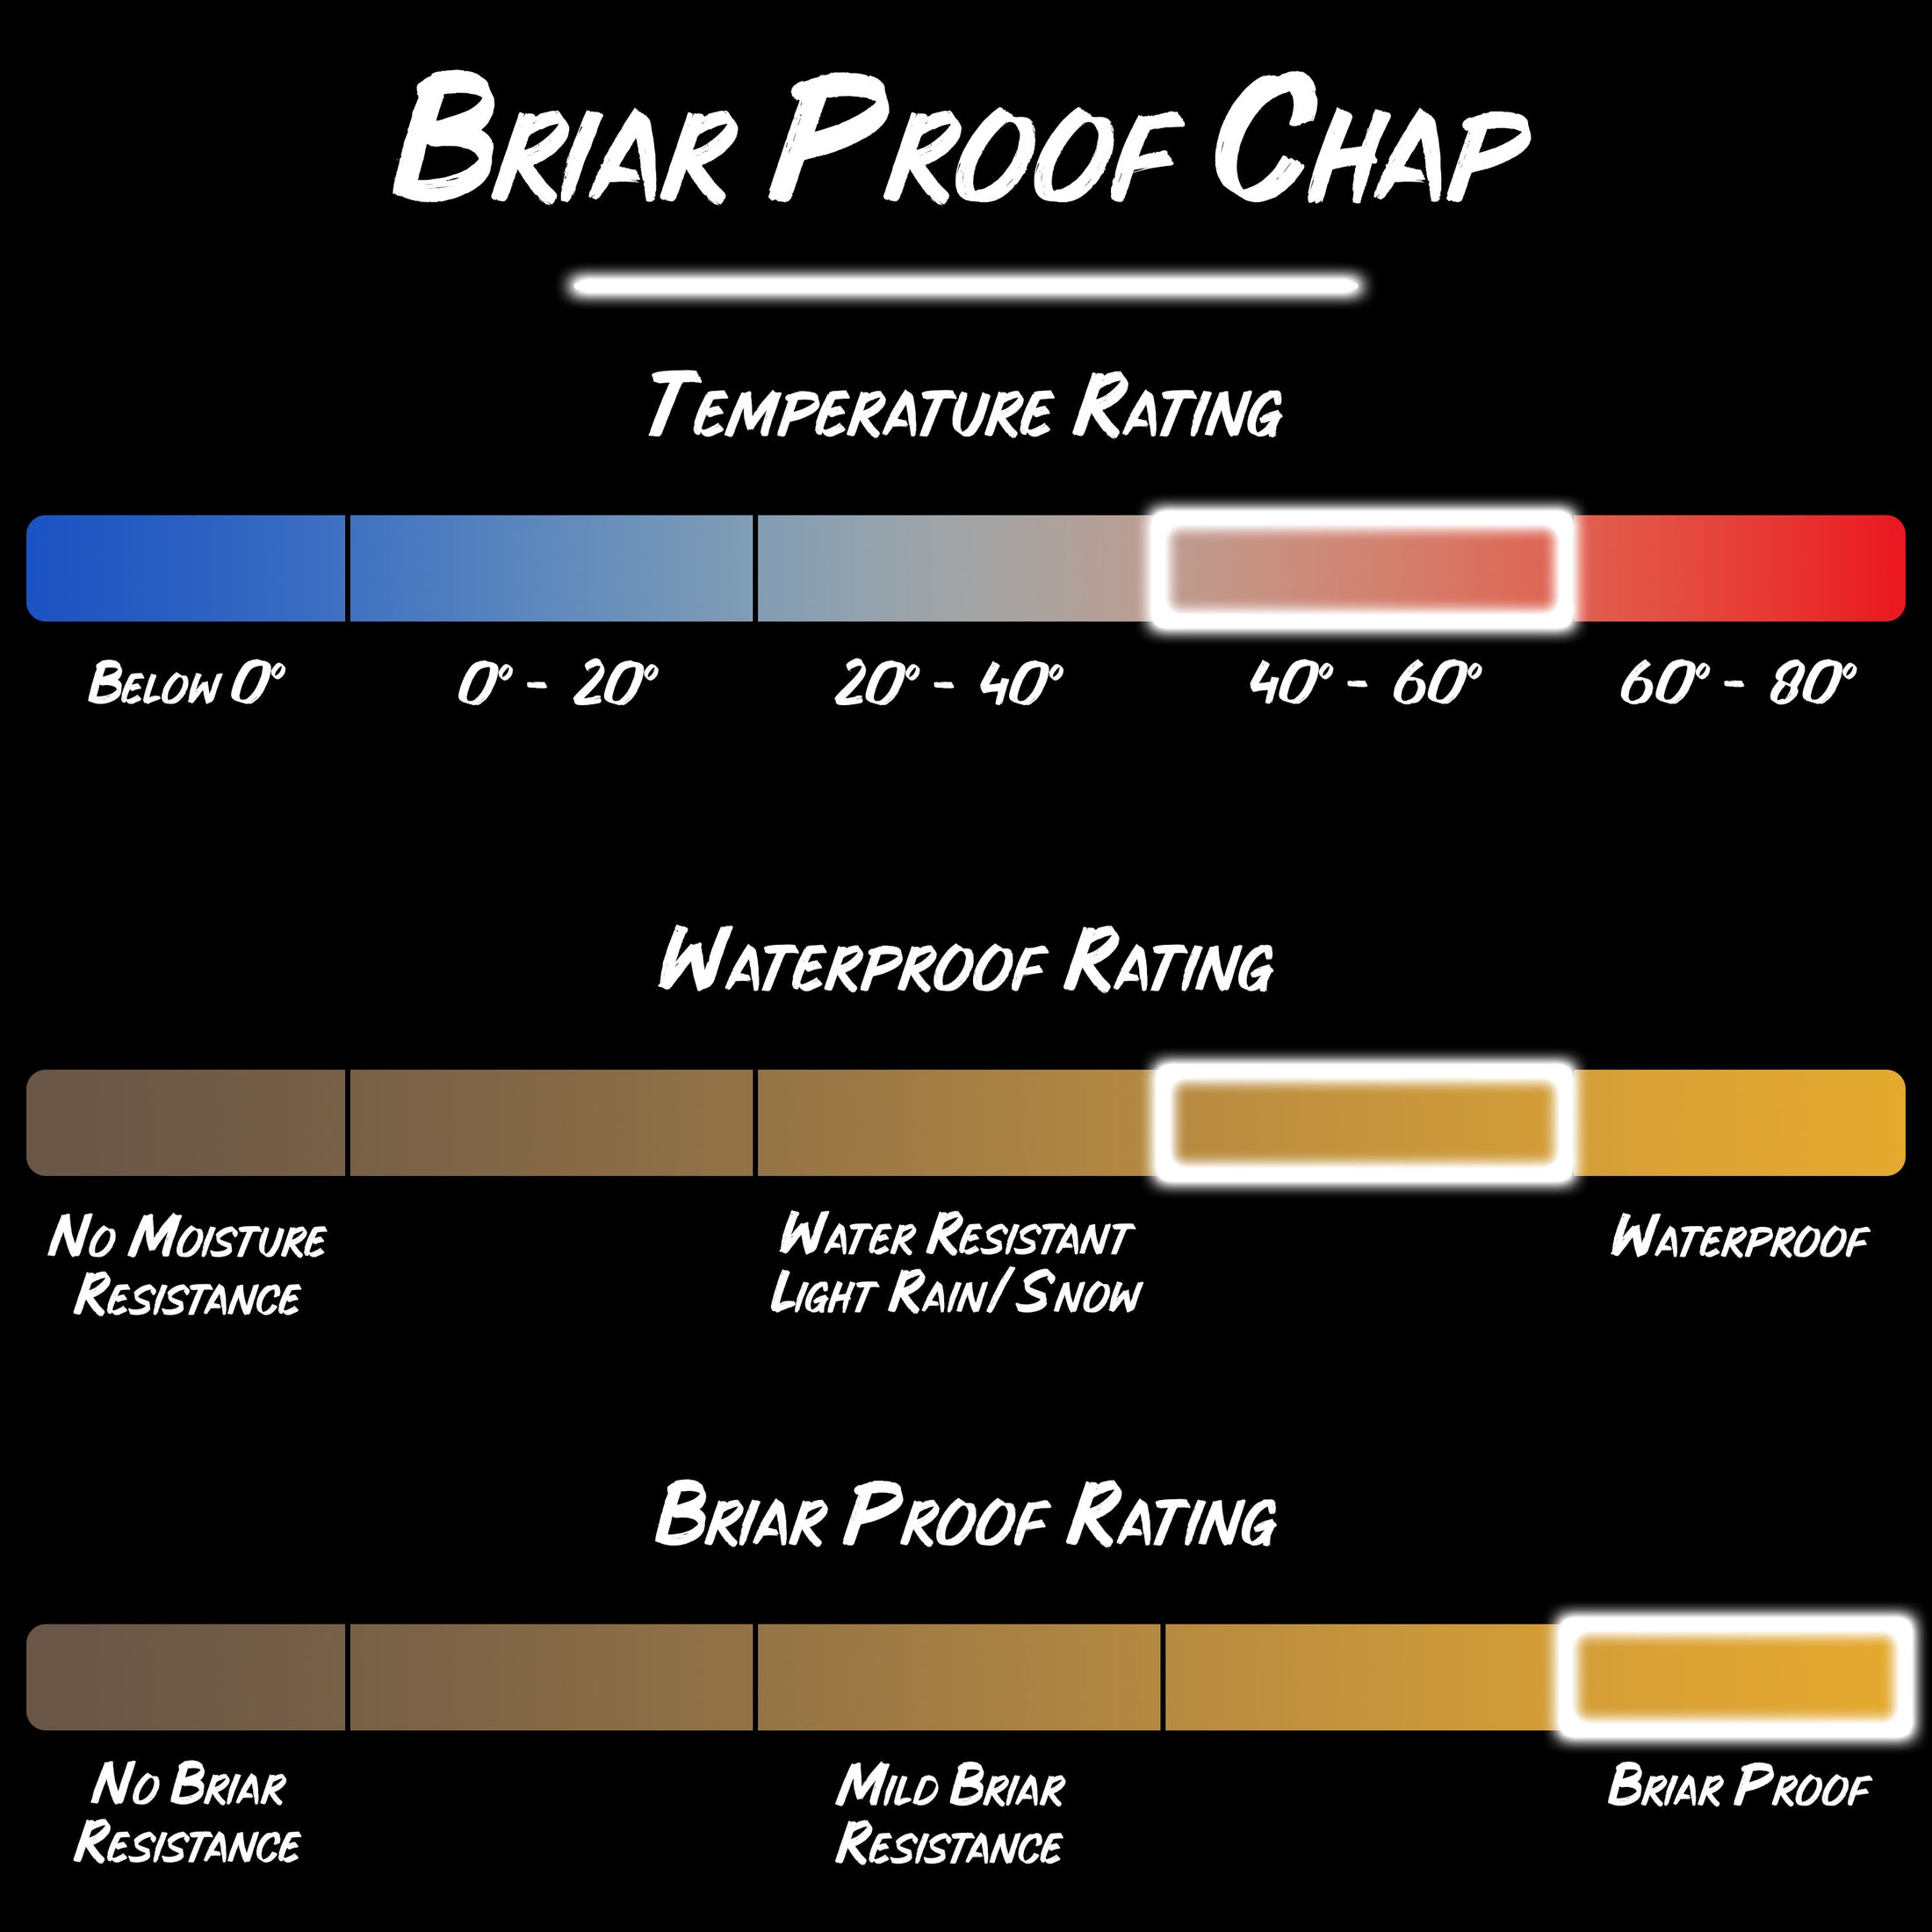 Gamehide briar proof chap product specifications